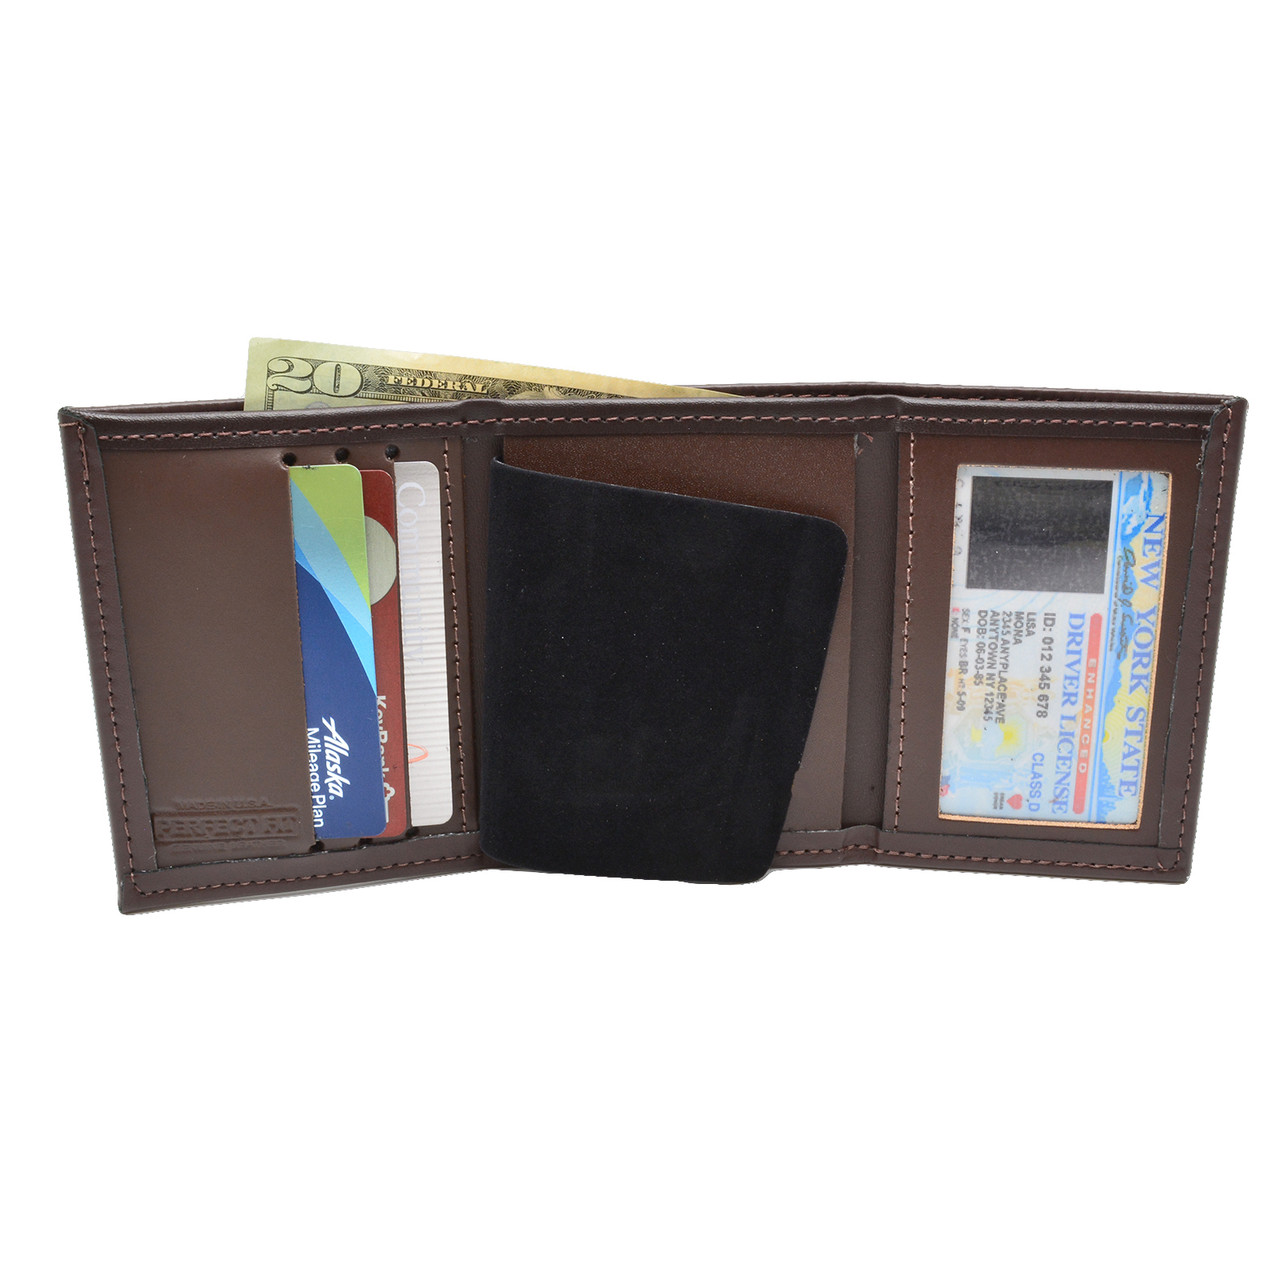 Perfect Fit Model 104-A Bifold Hidden Badge Wallet - Double ID - Cutout